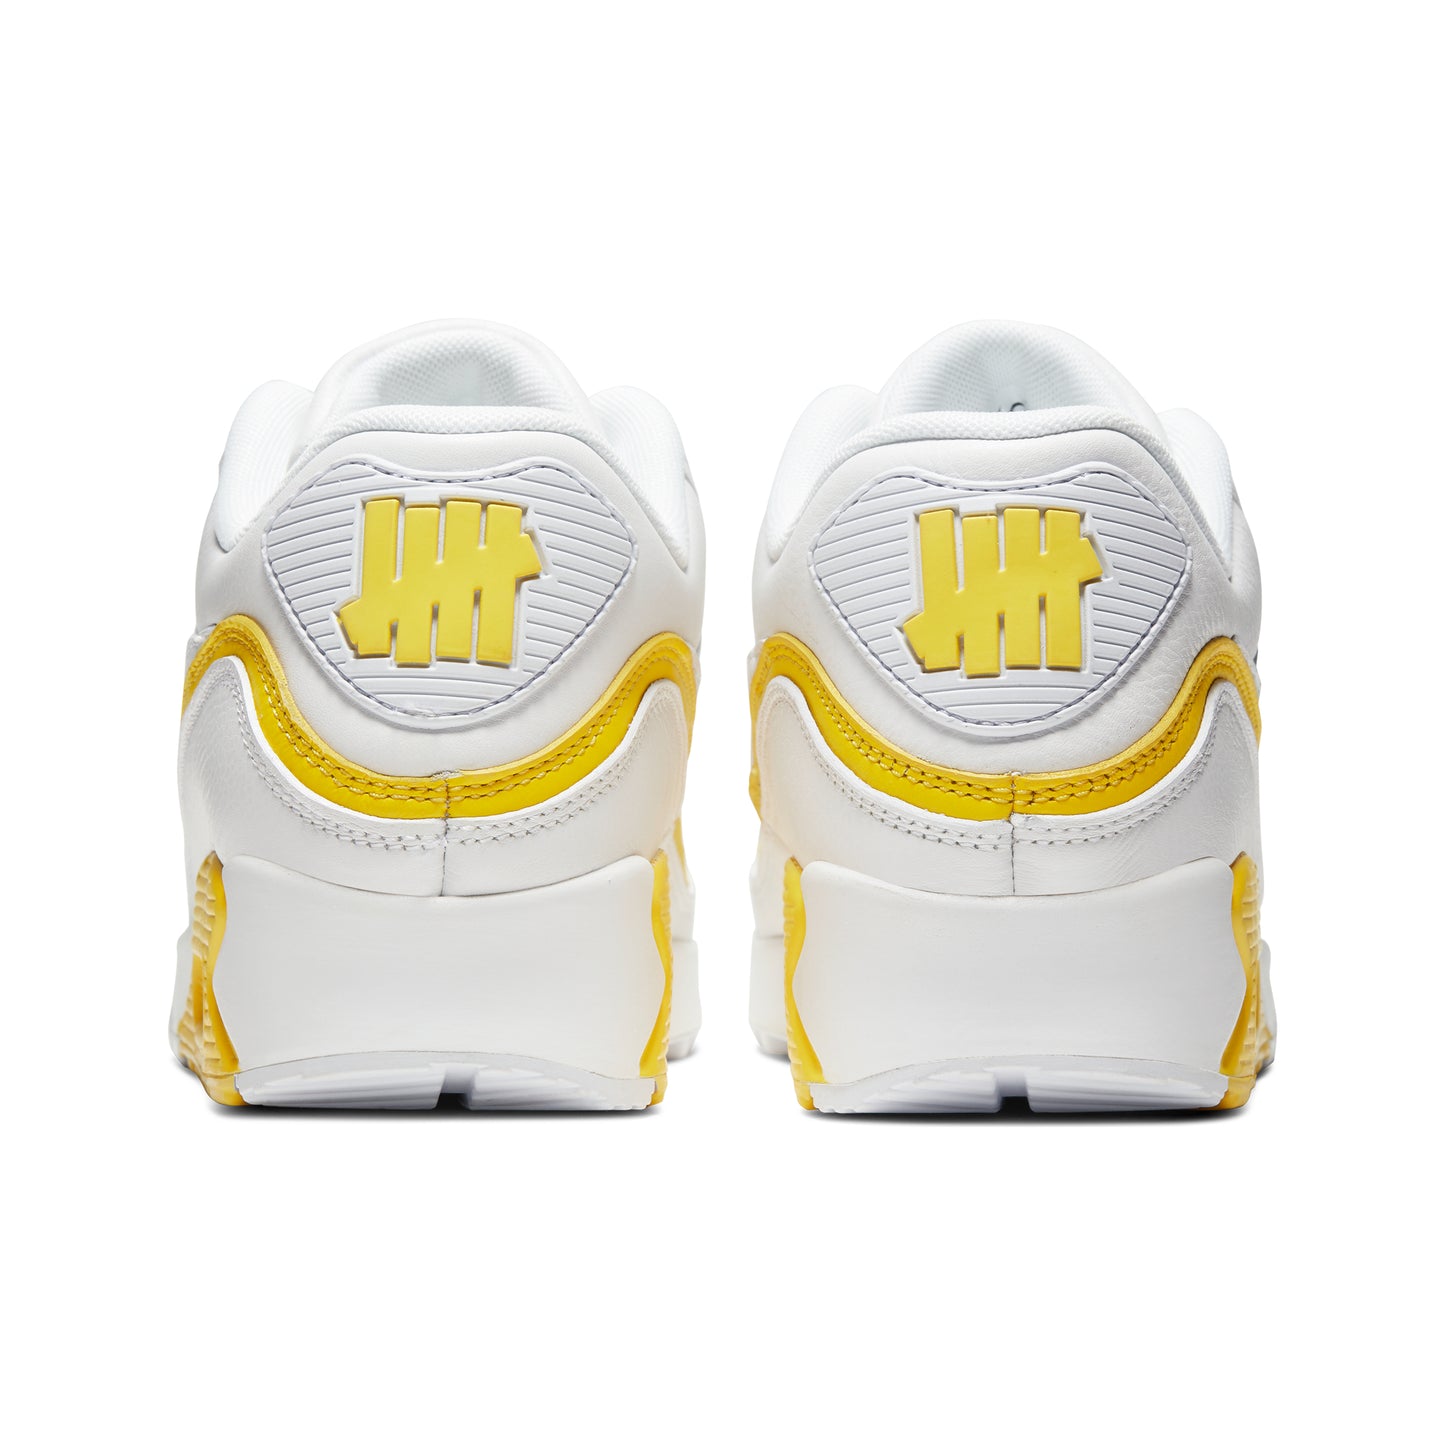 Nike Air Max 90 Undefeated White Optic Yellow